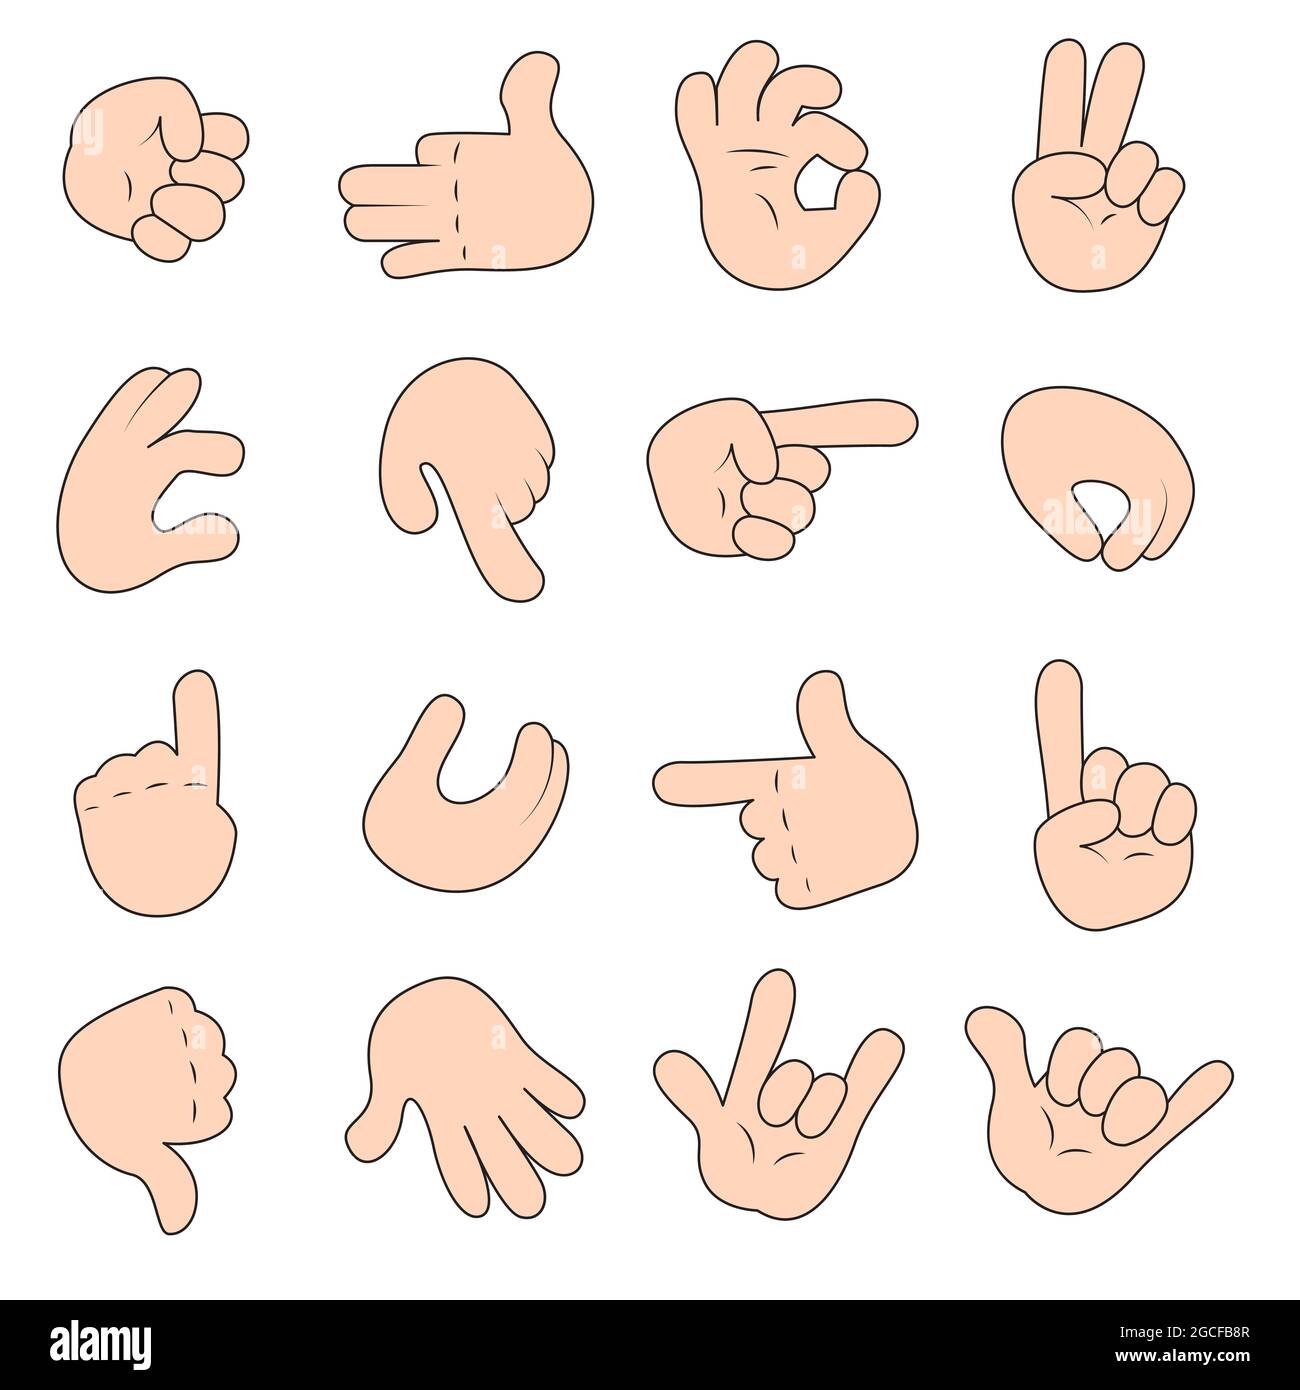 Cartoon hands set in different gestures. Hands show signs. Different hand positions, Isolated on white background. Vector illustration icon set. Stock Vector